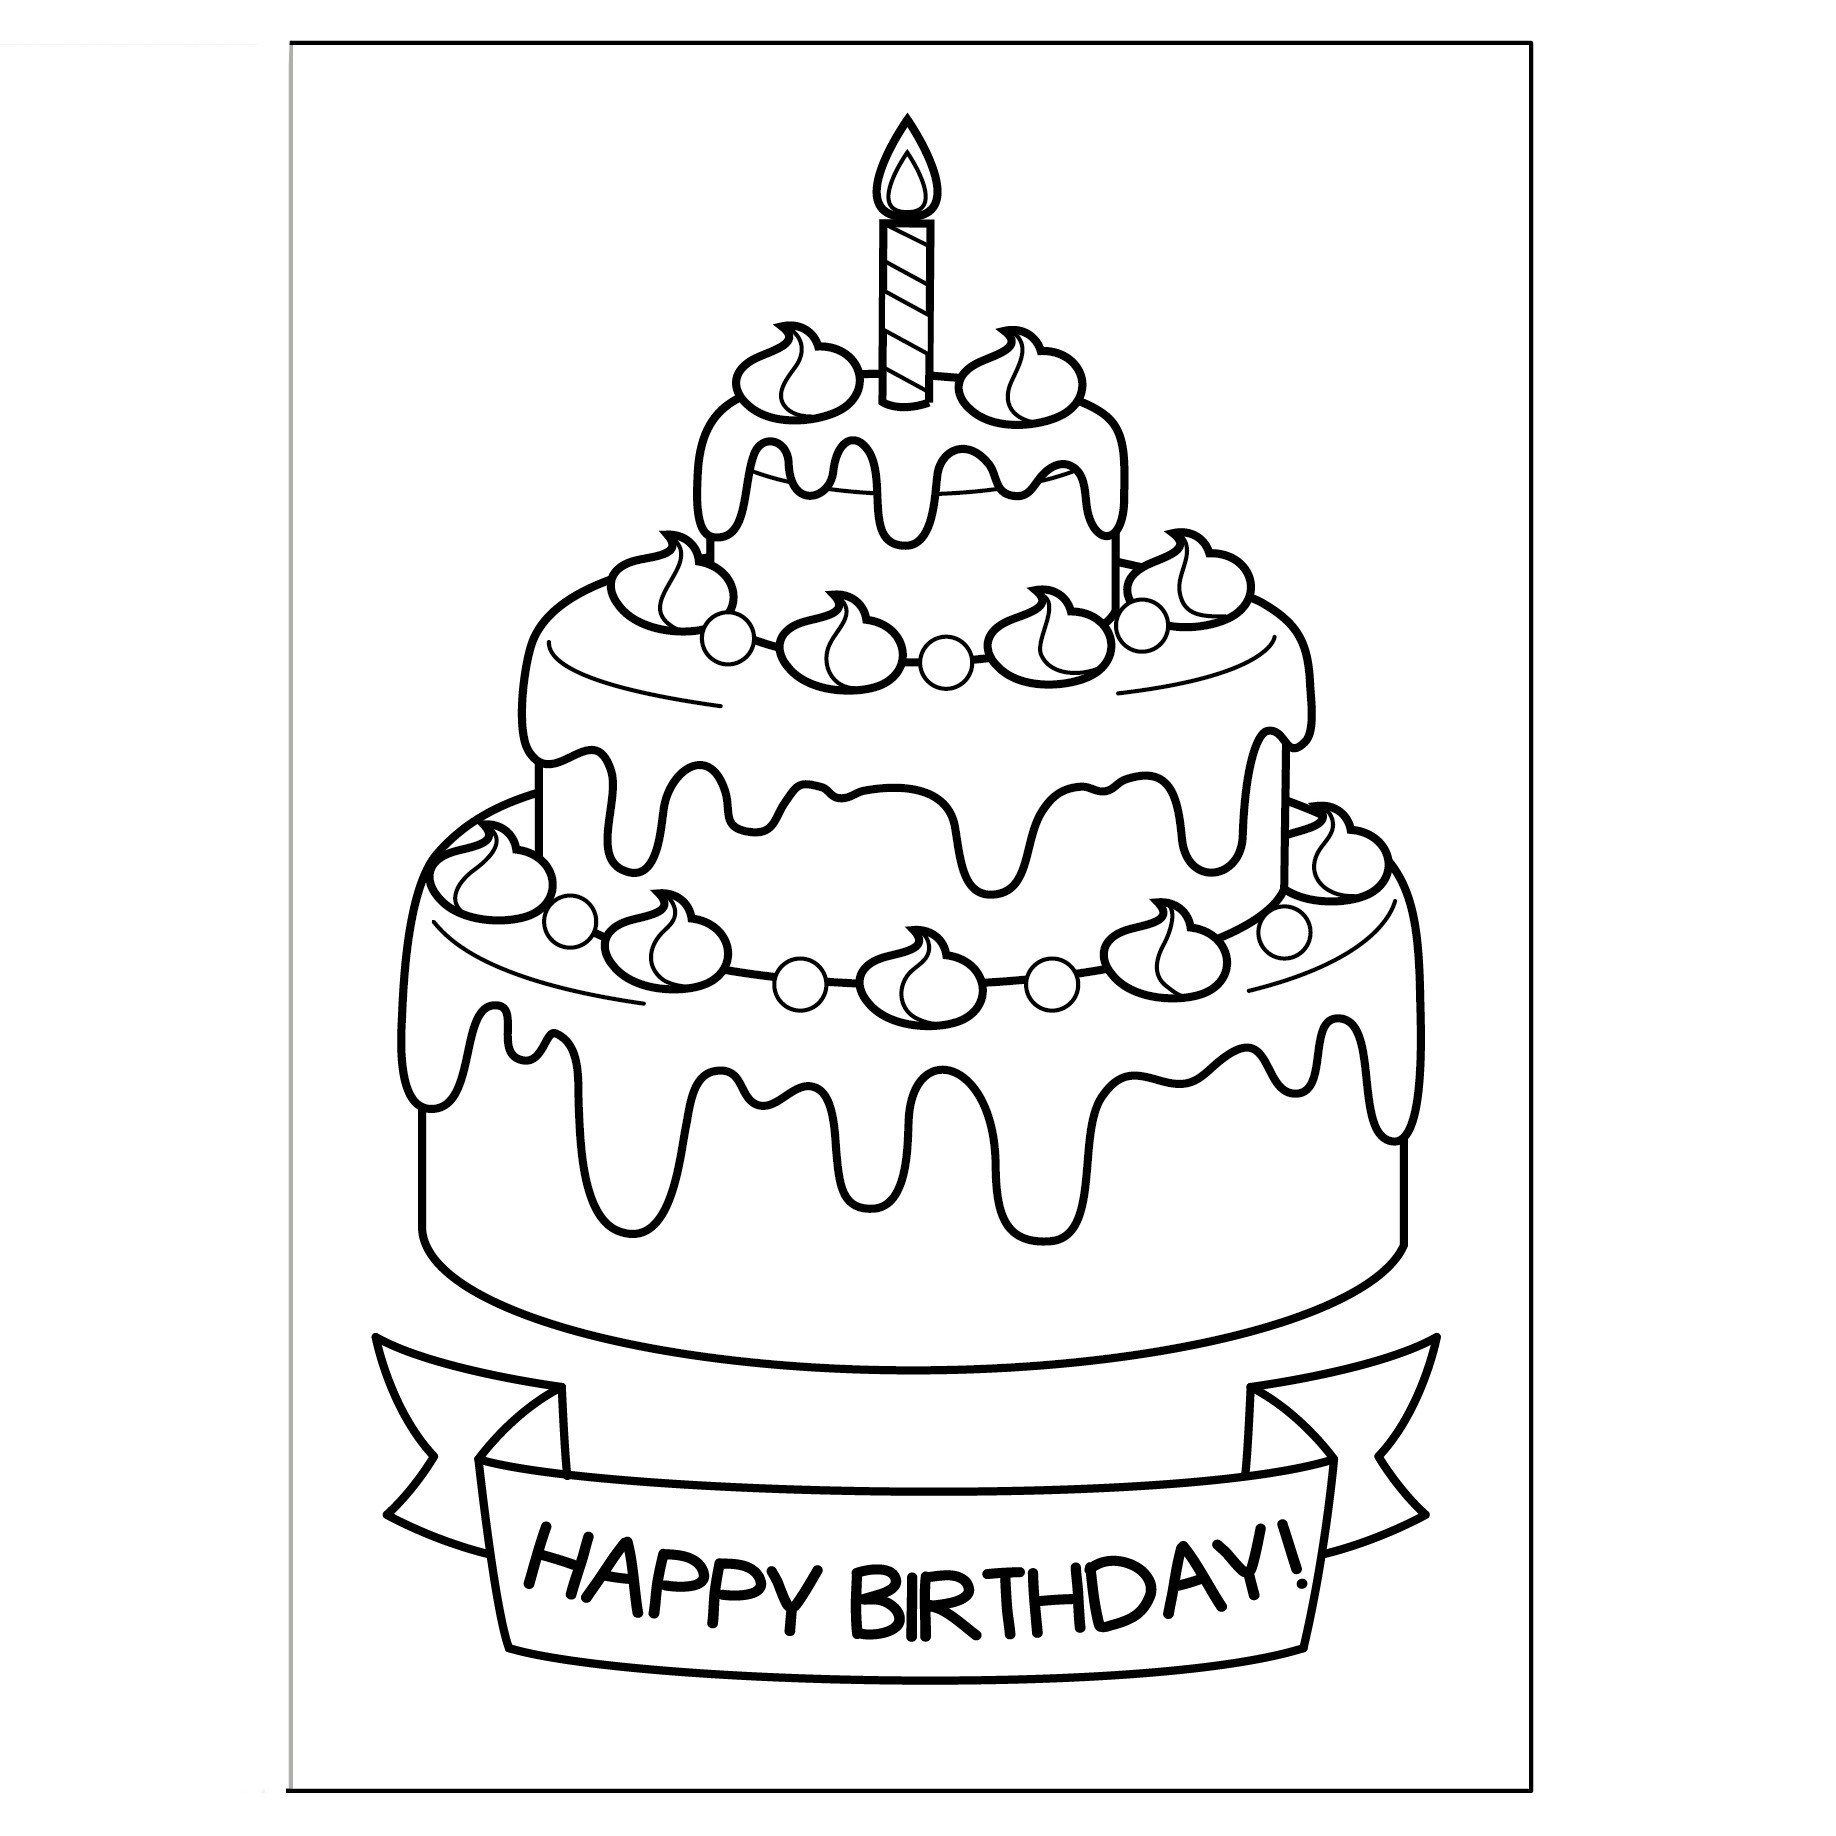 Printable Coloring Birthday Cards
 cute greeting cards to print and color Ayelet Keshet